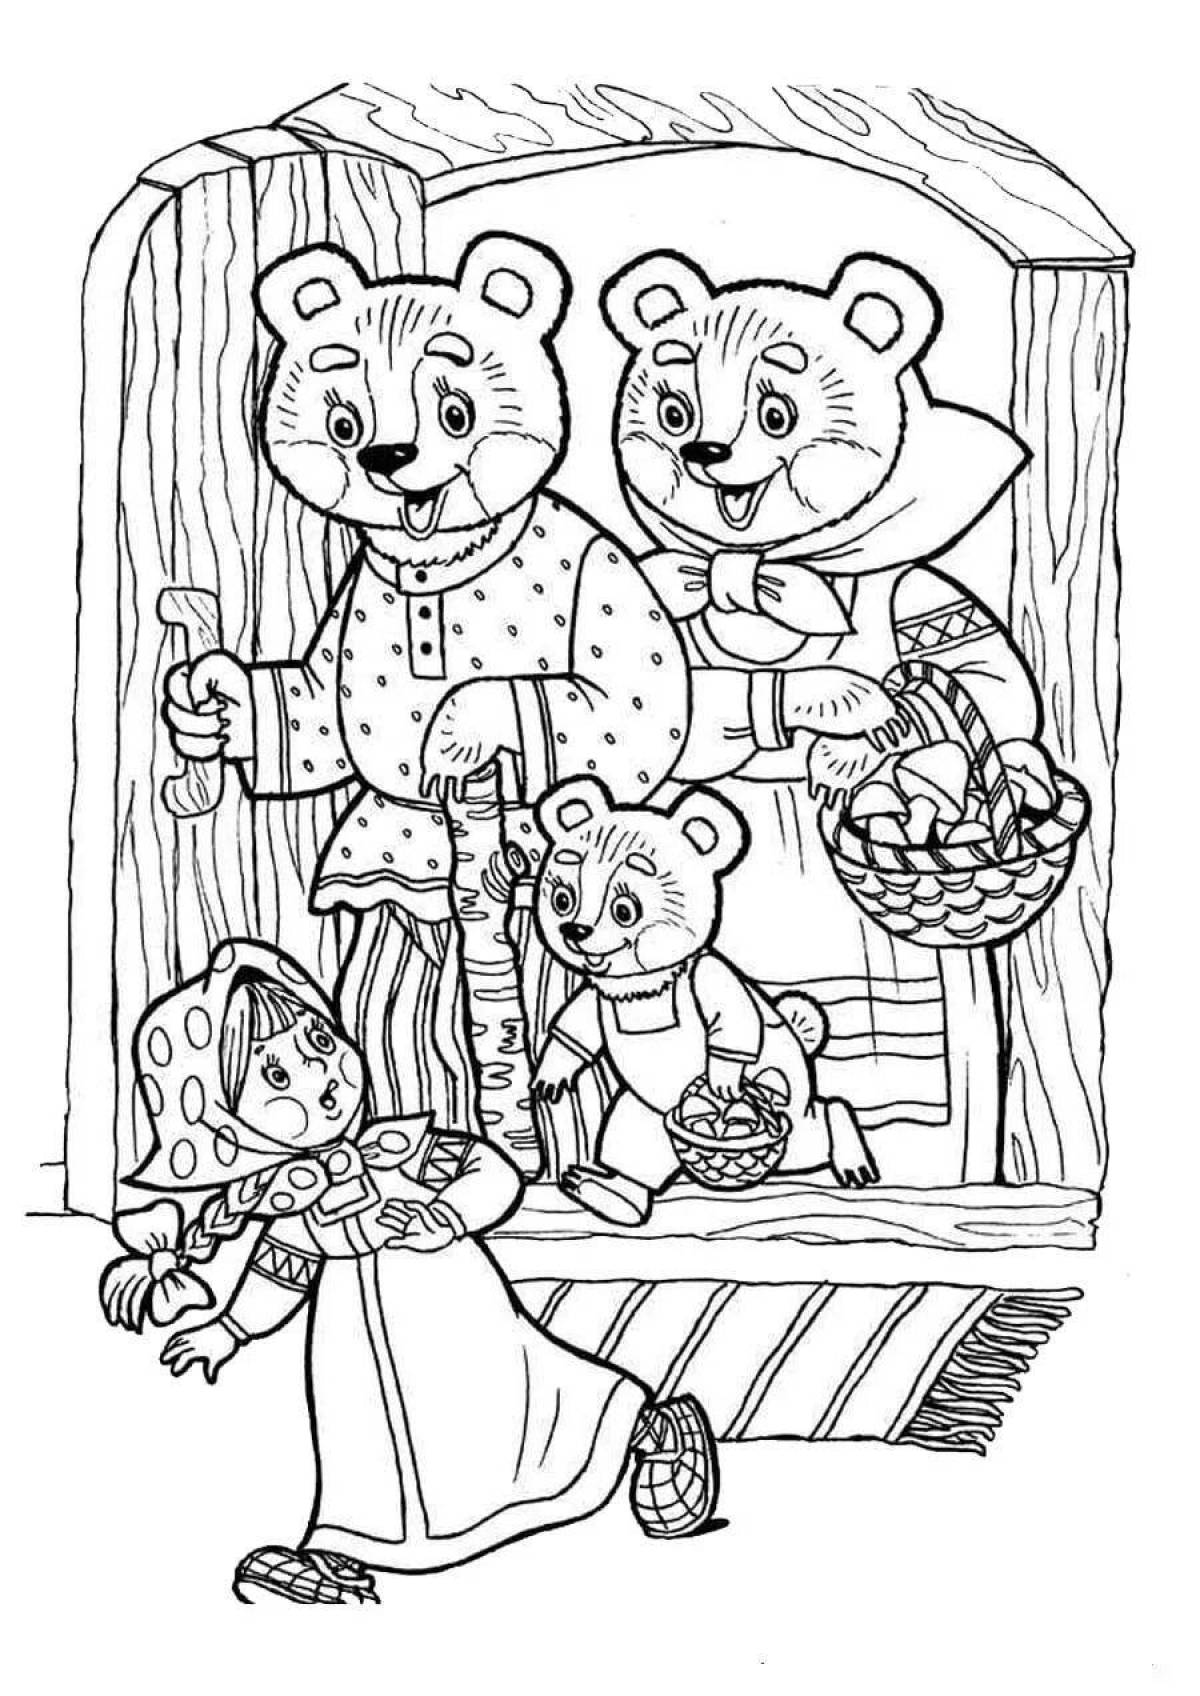 Joyful coloring book Masha and the Bear fairy tale for children